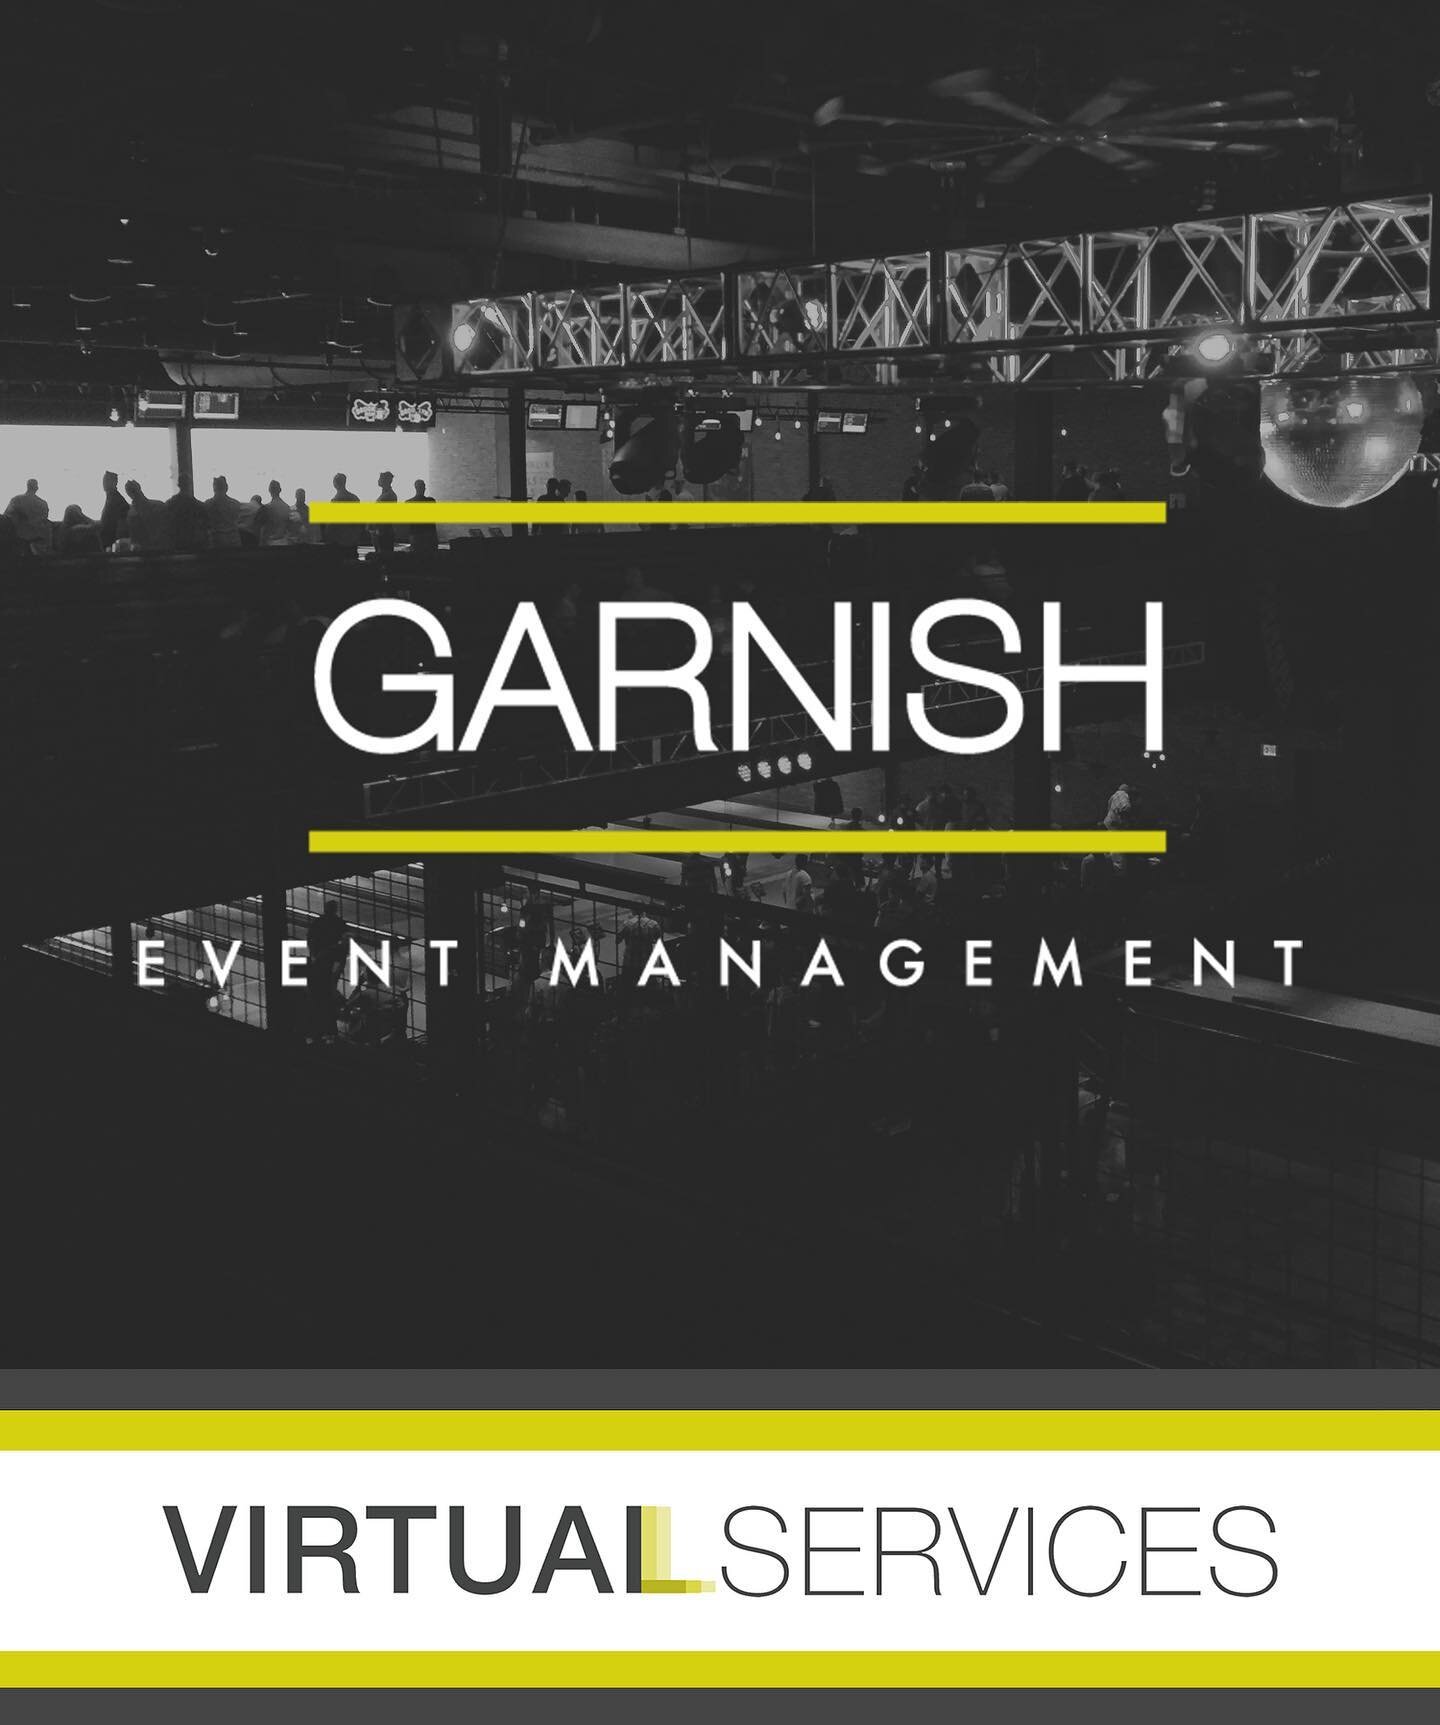 The virtual event industry has grown exponentially during the times of COVID19. While there are many great platforms, tools, and offerings our research has shown that there is a real need for additional support and guidance when planning virtual even